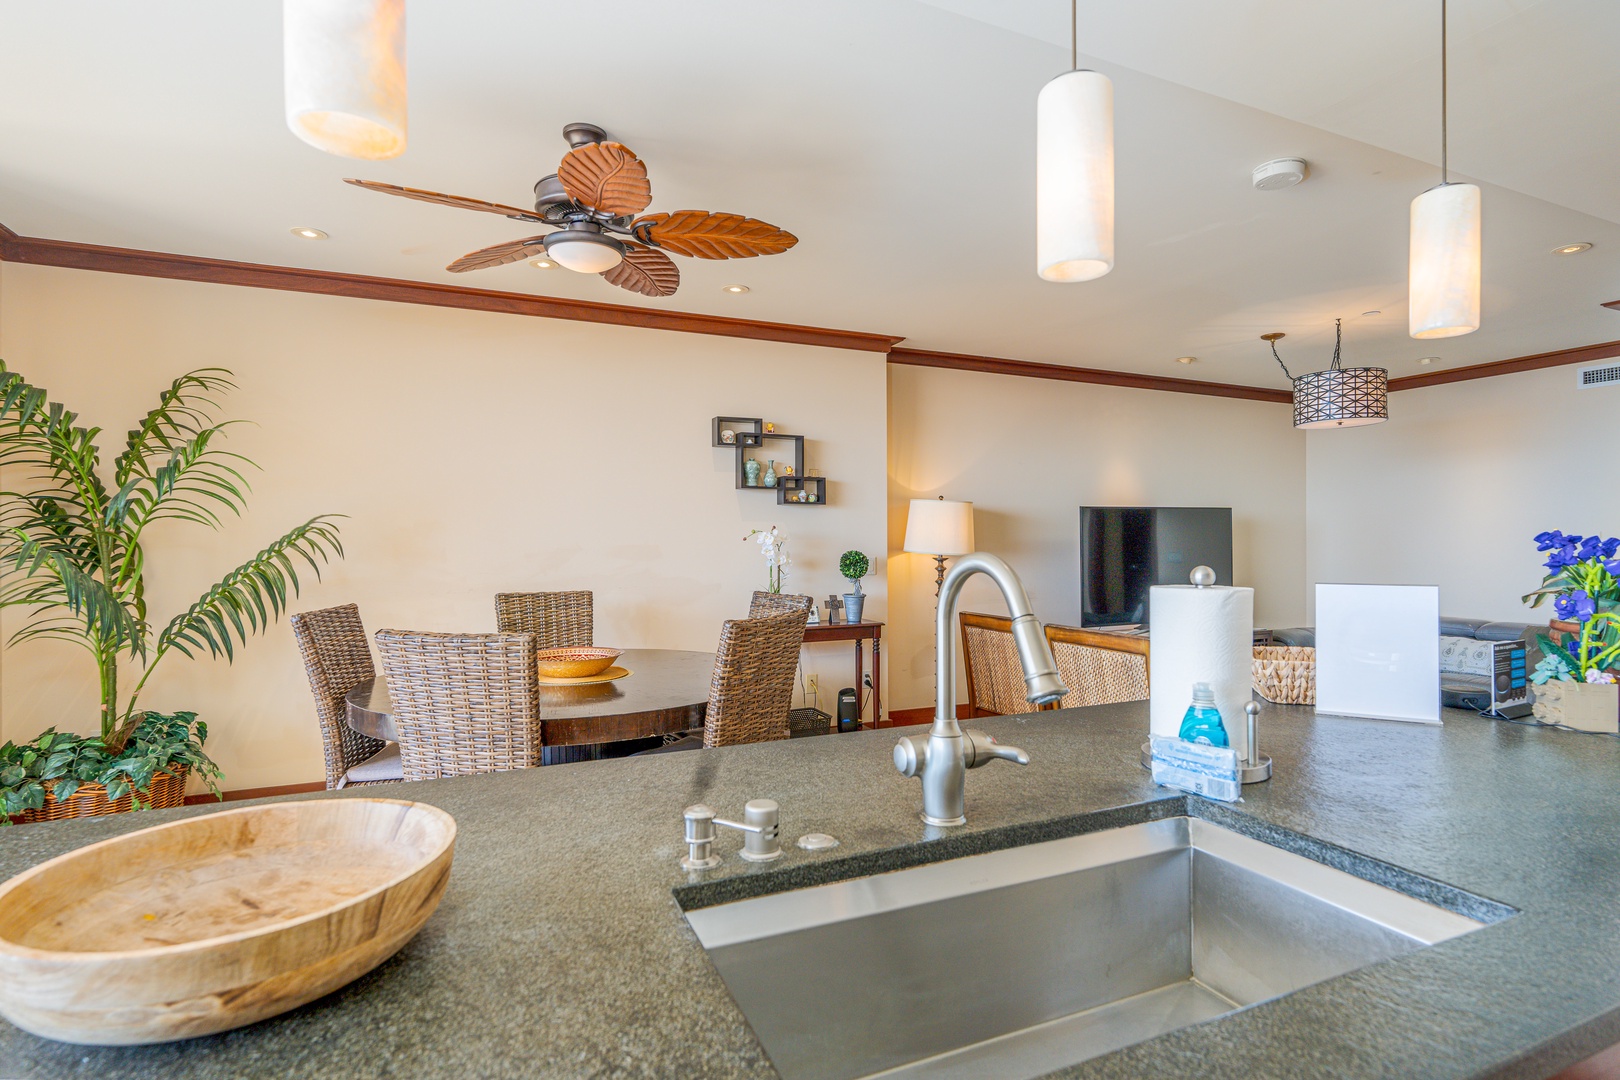 Kapolei Vacation Rentals, Ko Olina Beach Villas O904 - Converse with the chef and enjoy appetizers on the island.